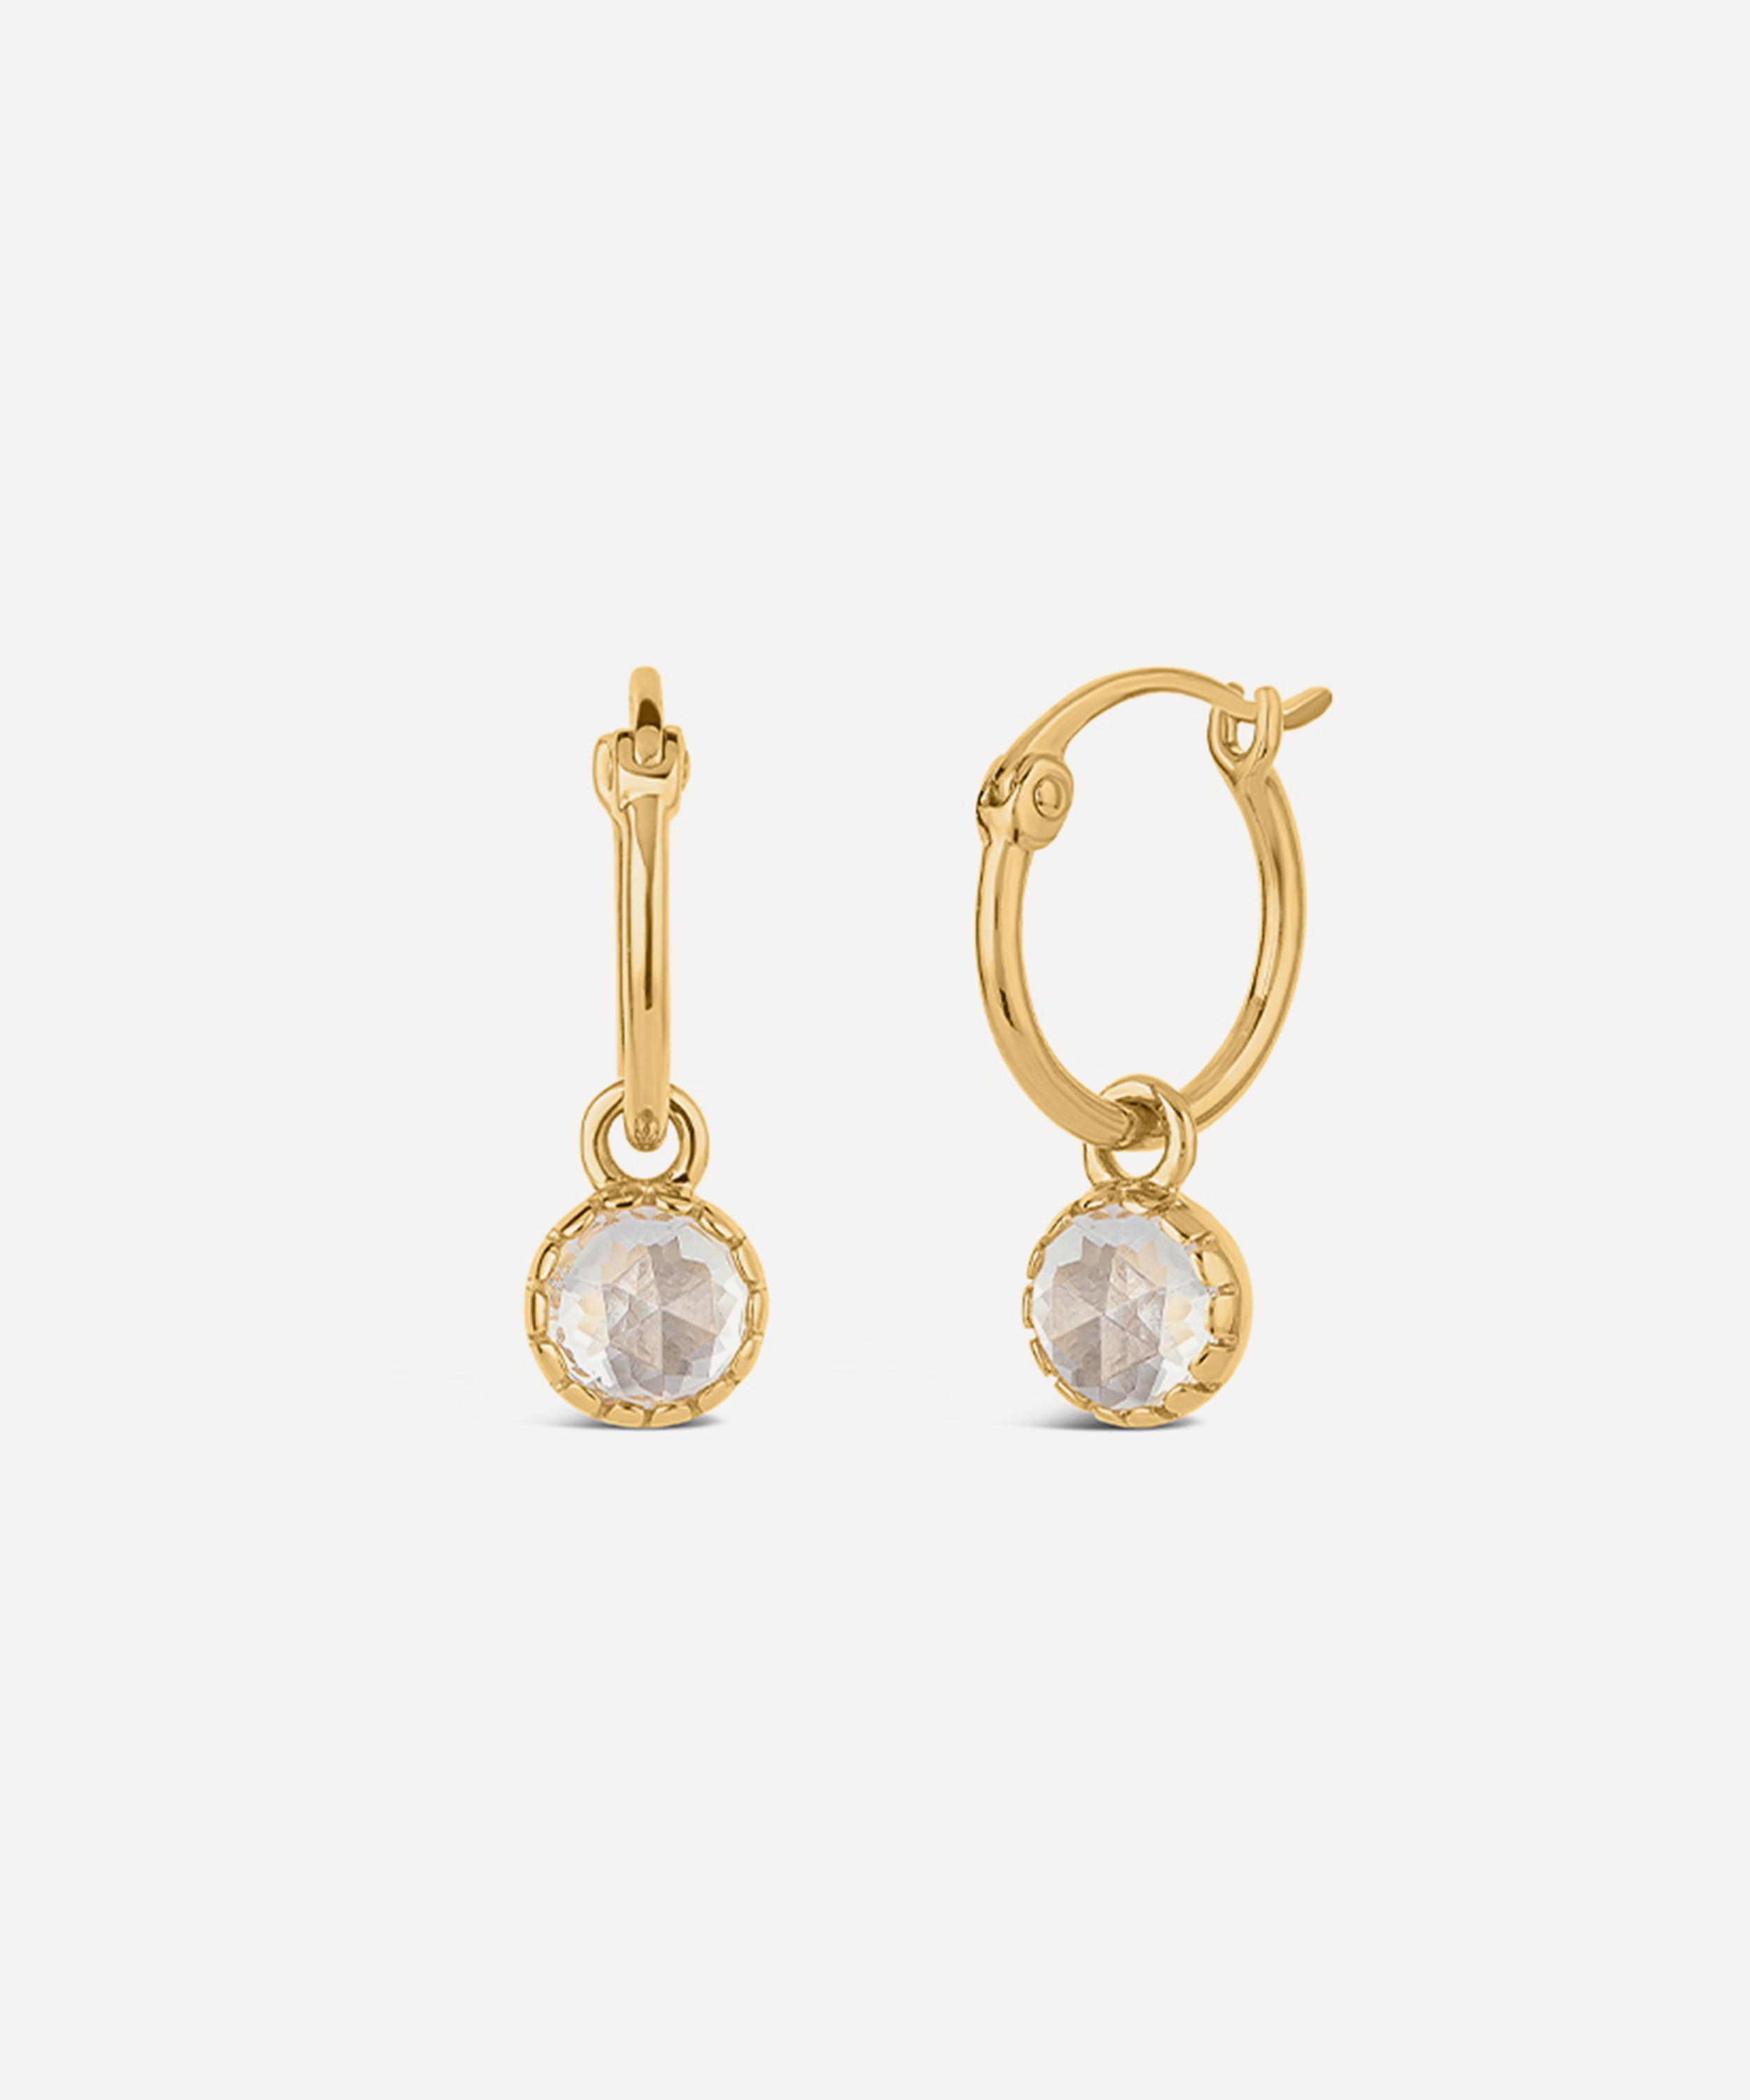 Dinny Hall - 22ct Gold Plated Vermeil Silver Gem Drop Small Rose Cut White Topaz Hoop Earrings